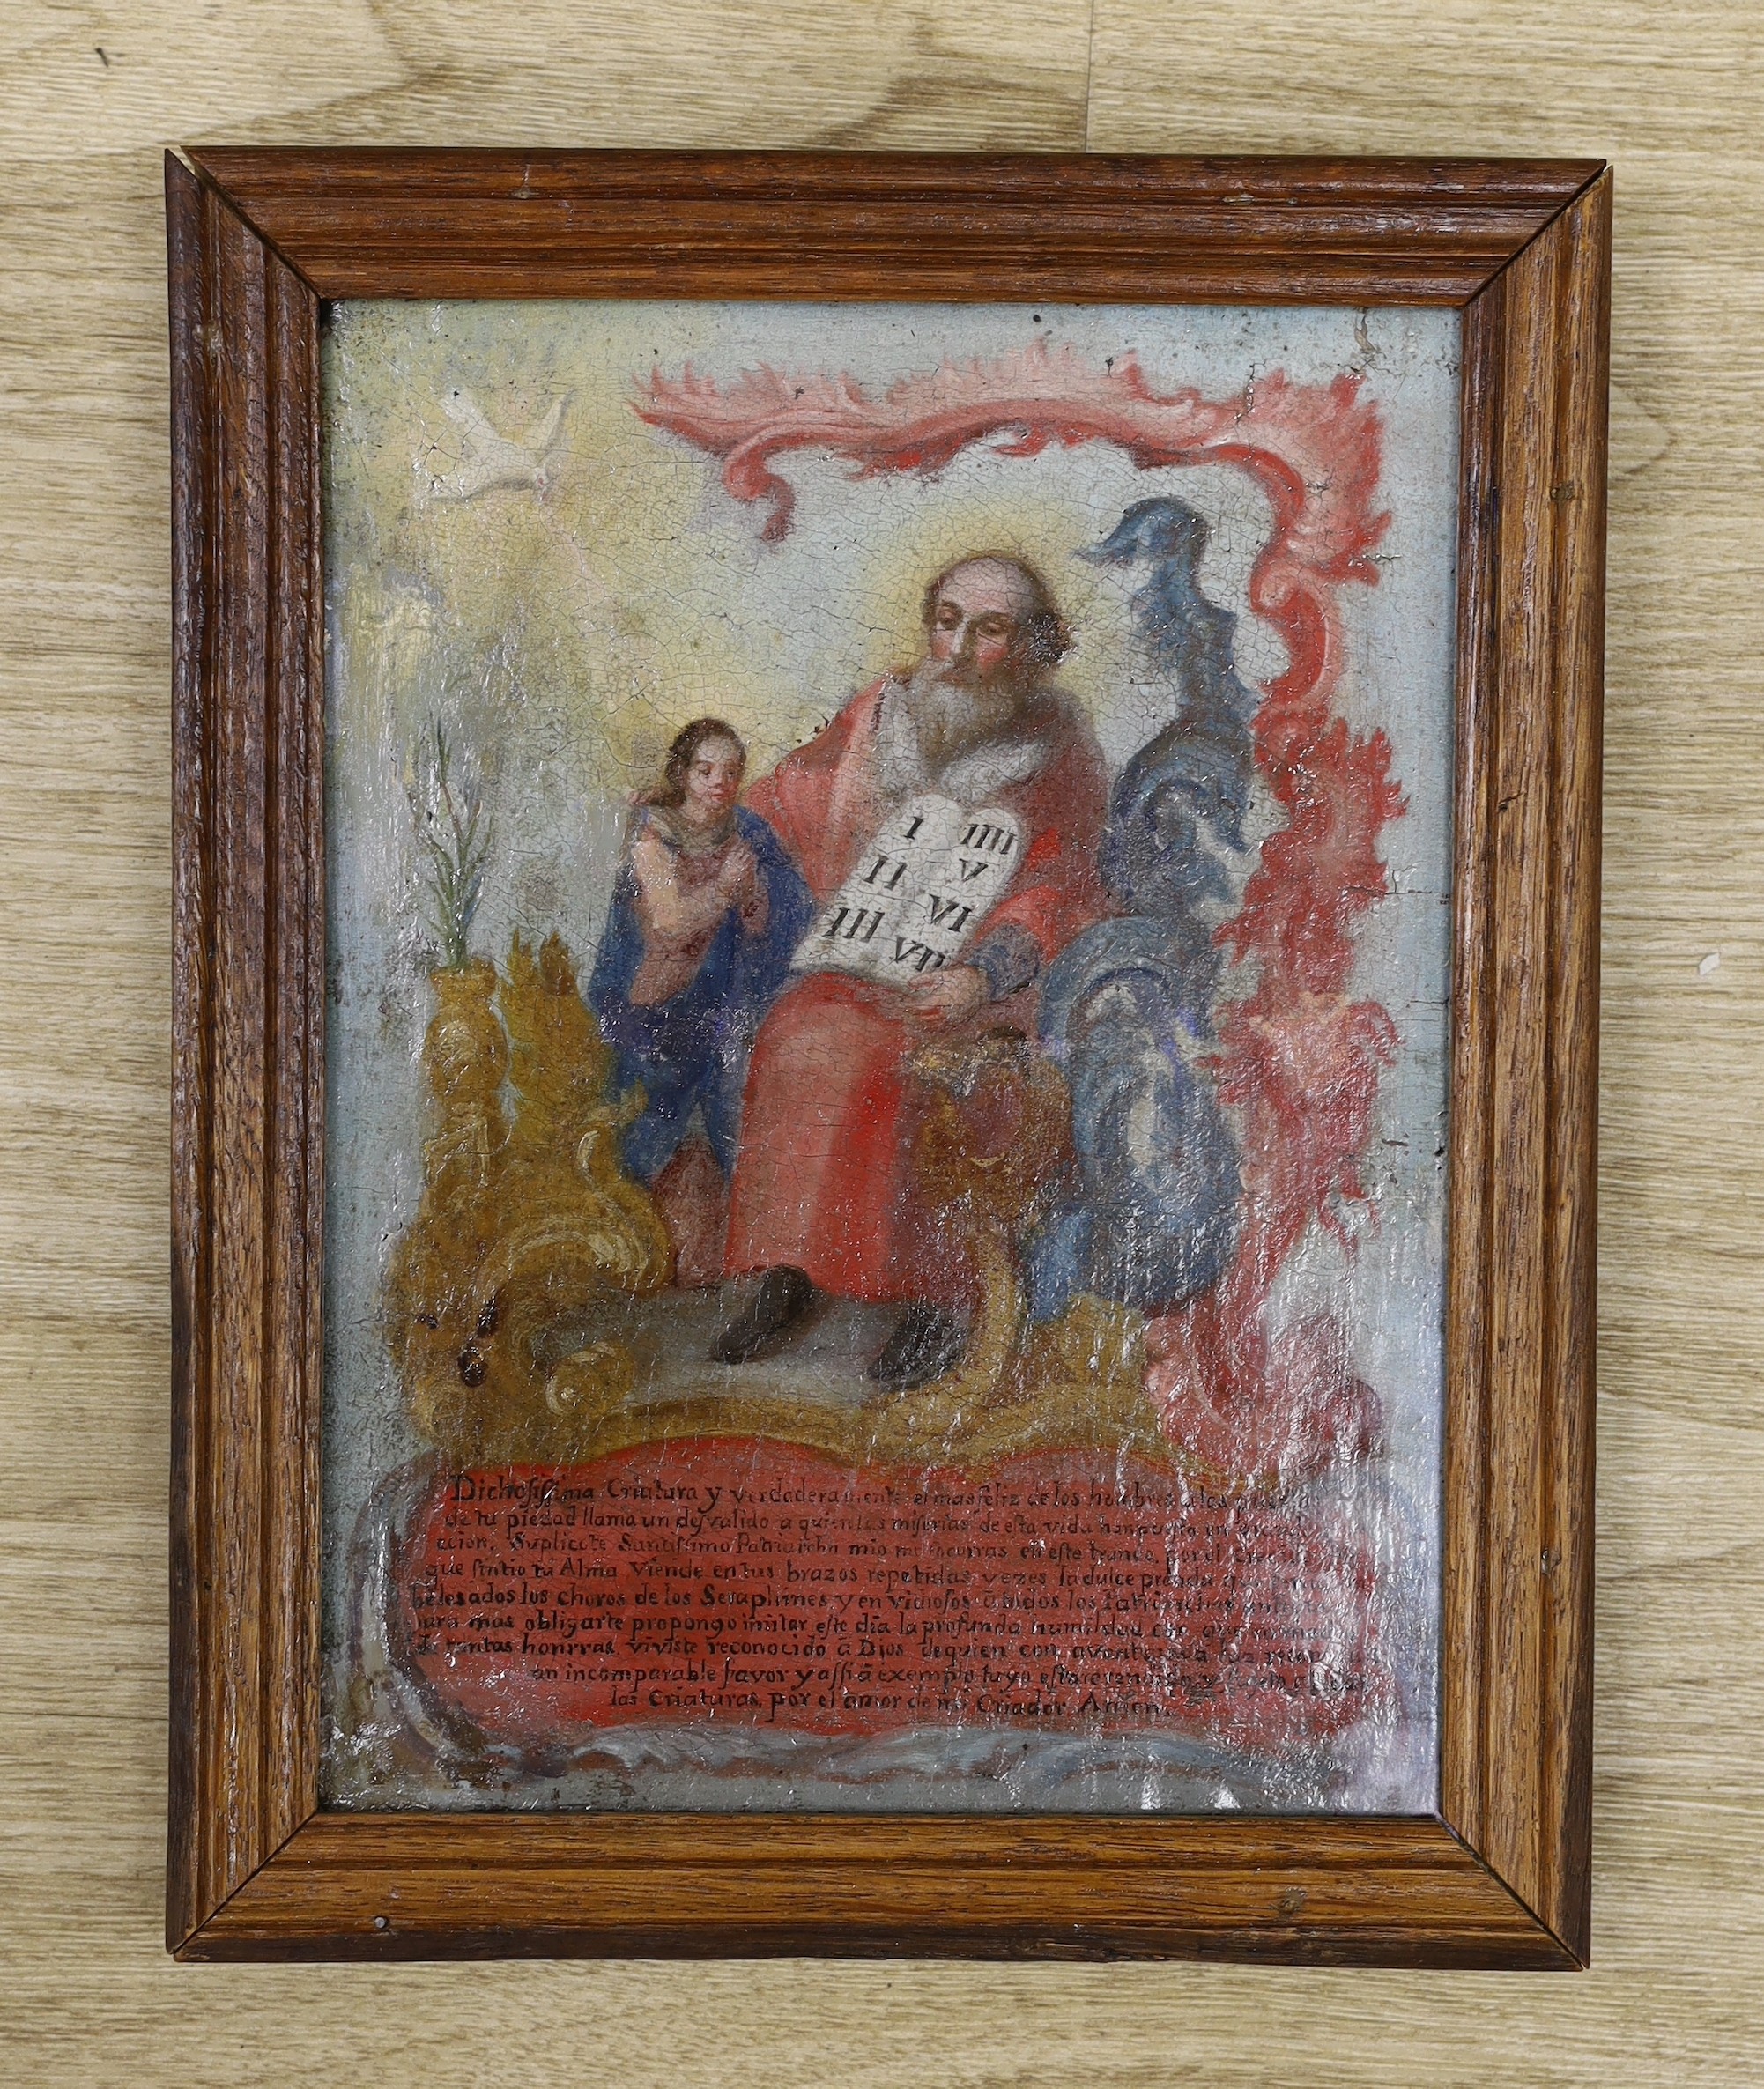 Early 19th century Spanish School, oil on canvas, Figures with religious inscription below, 25 x 18cm